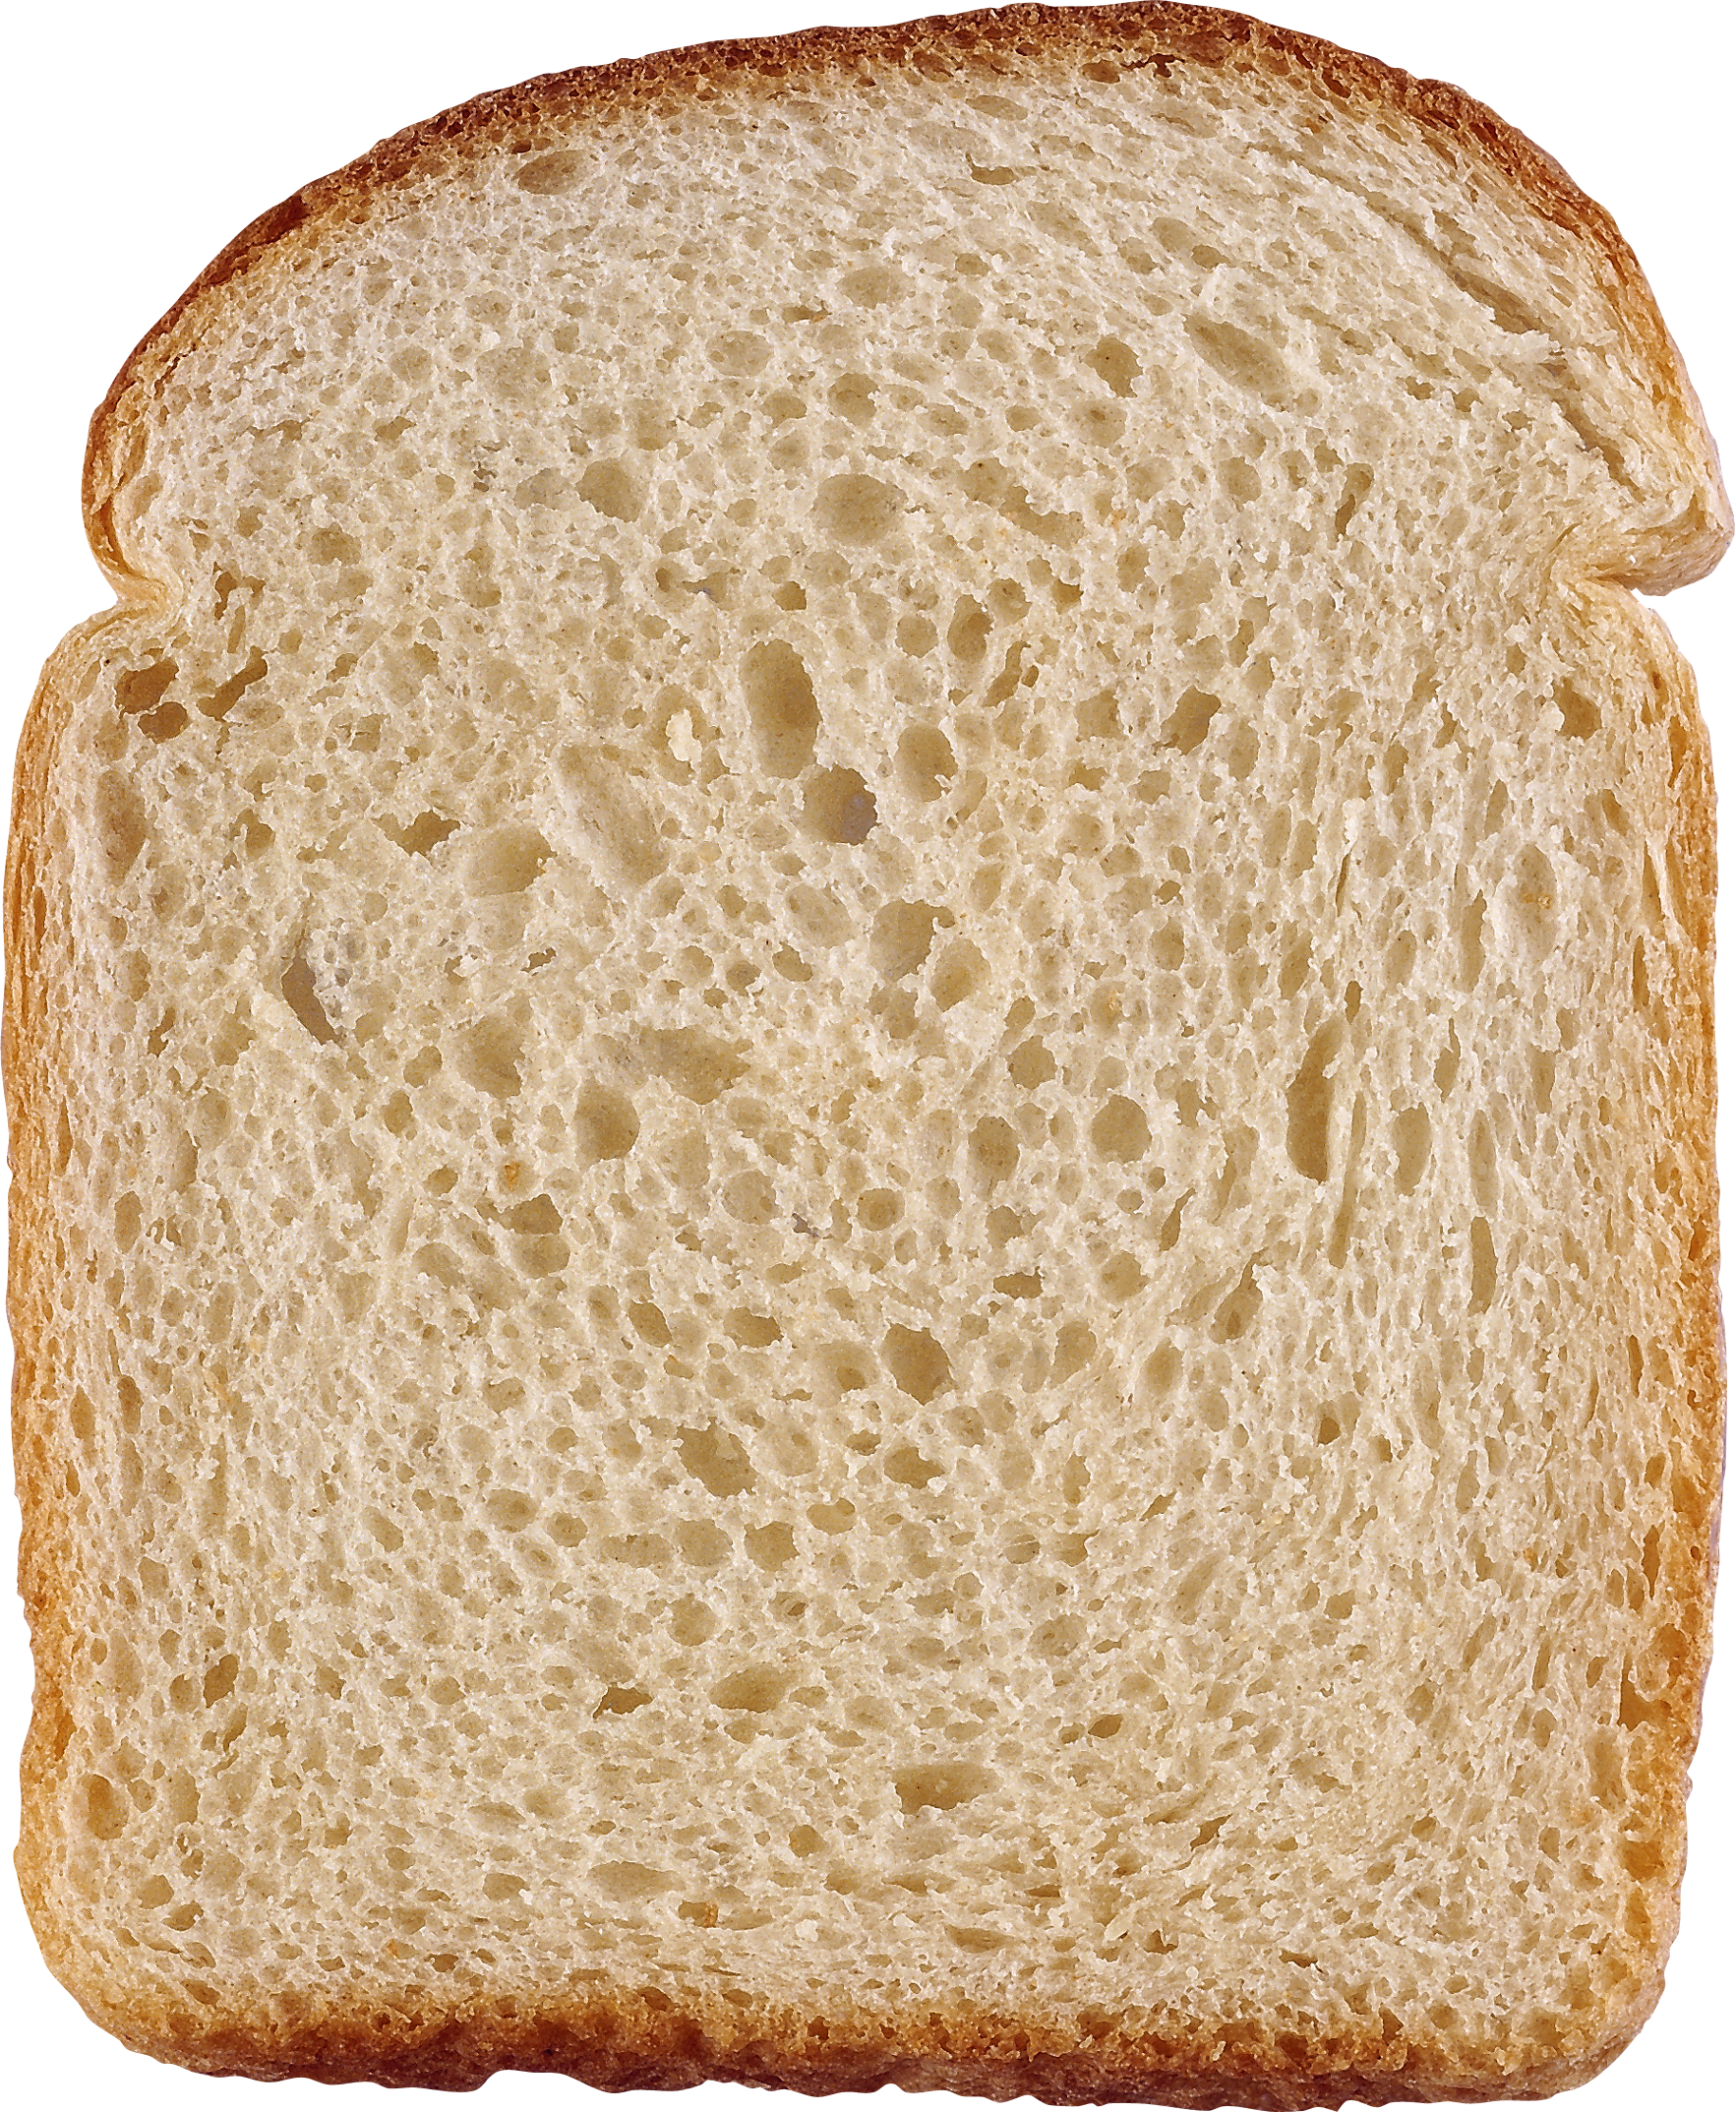 Png image free download. Grains clipart bakery bread